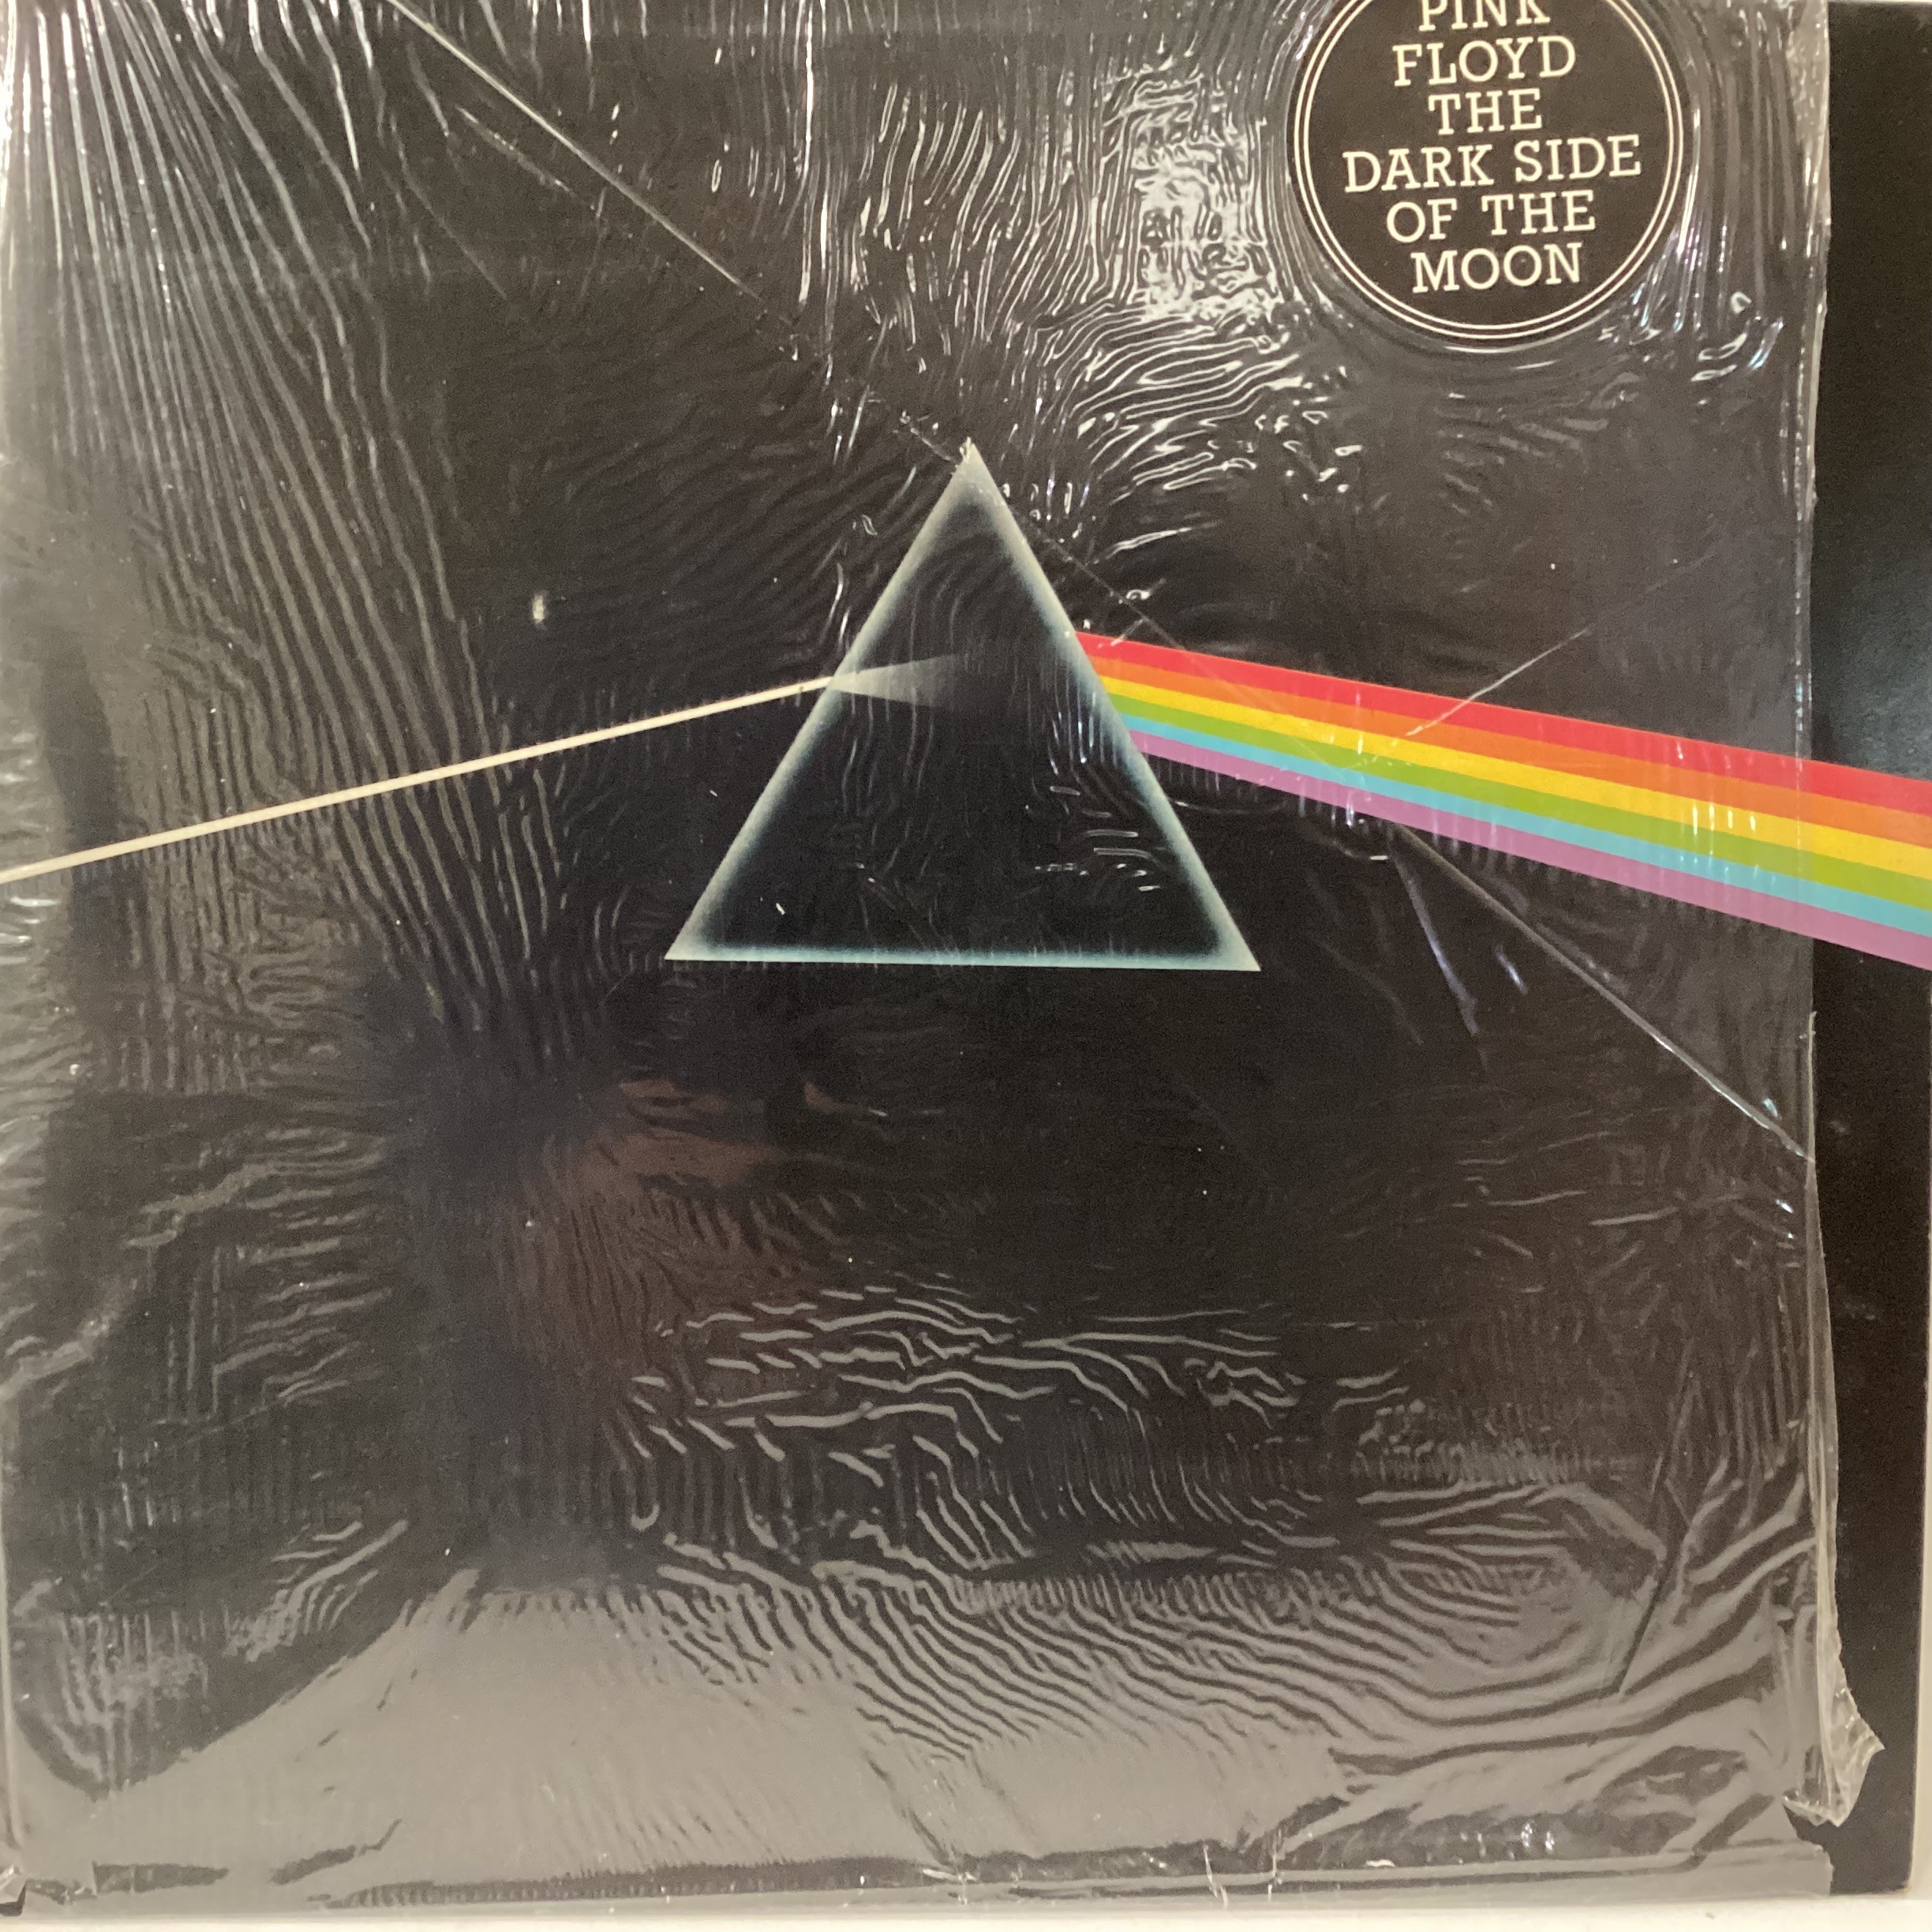 PINK FLOYD VINYL ALBUM ‘DARK SIDE OF THE MOON’. This is on Harvest SHVL 804 from 1973 with A3/B3